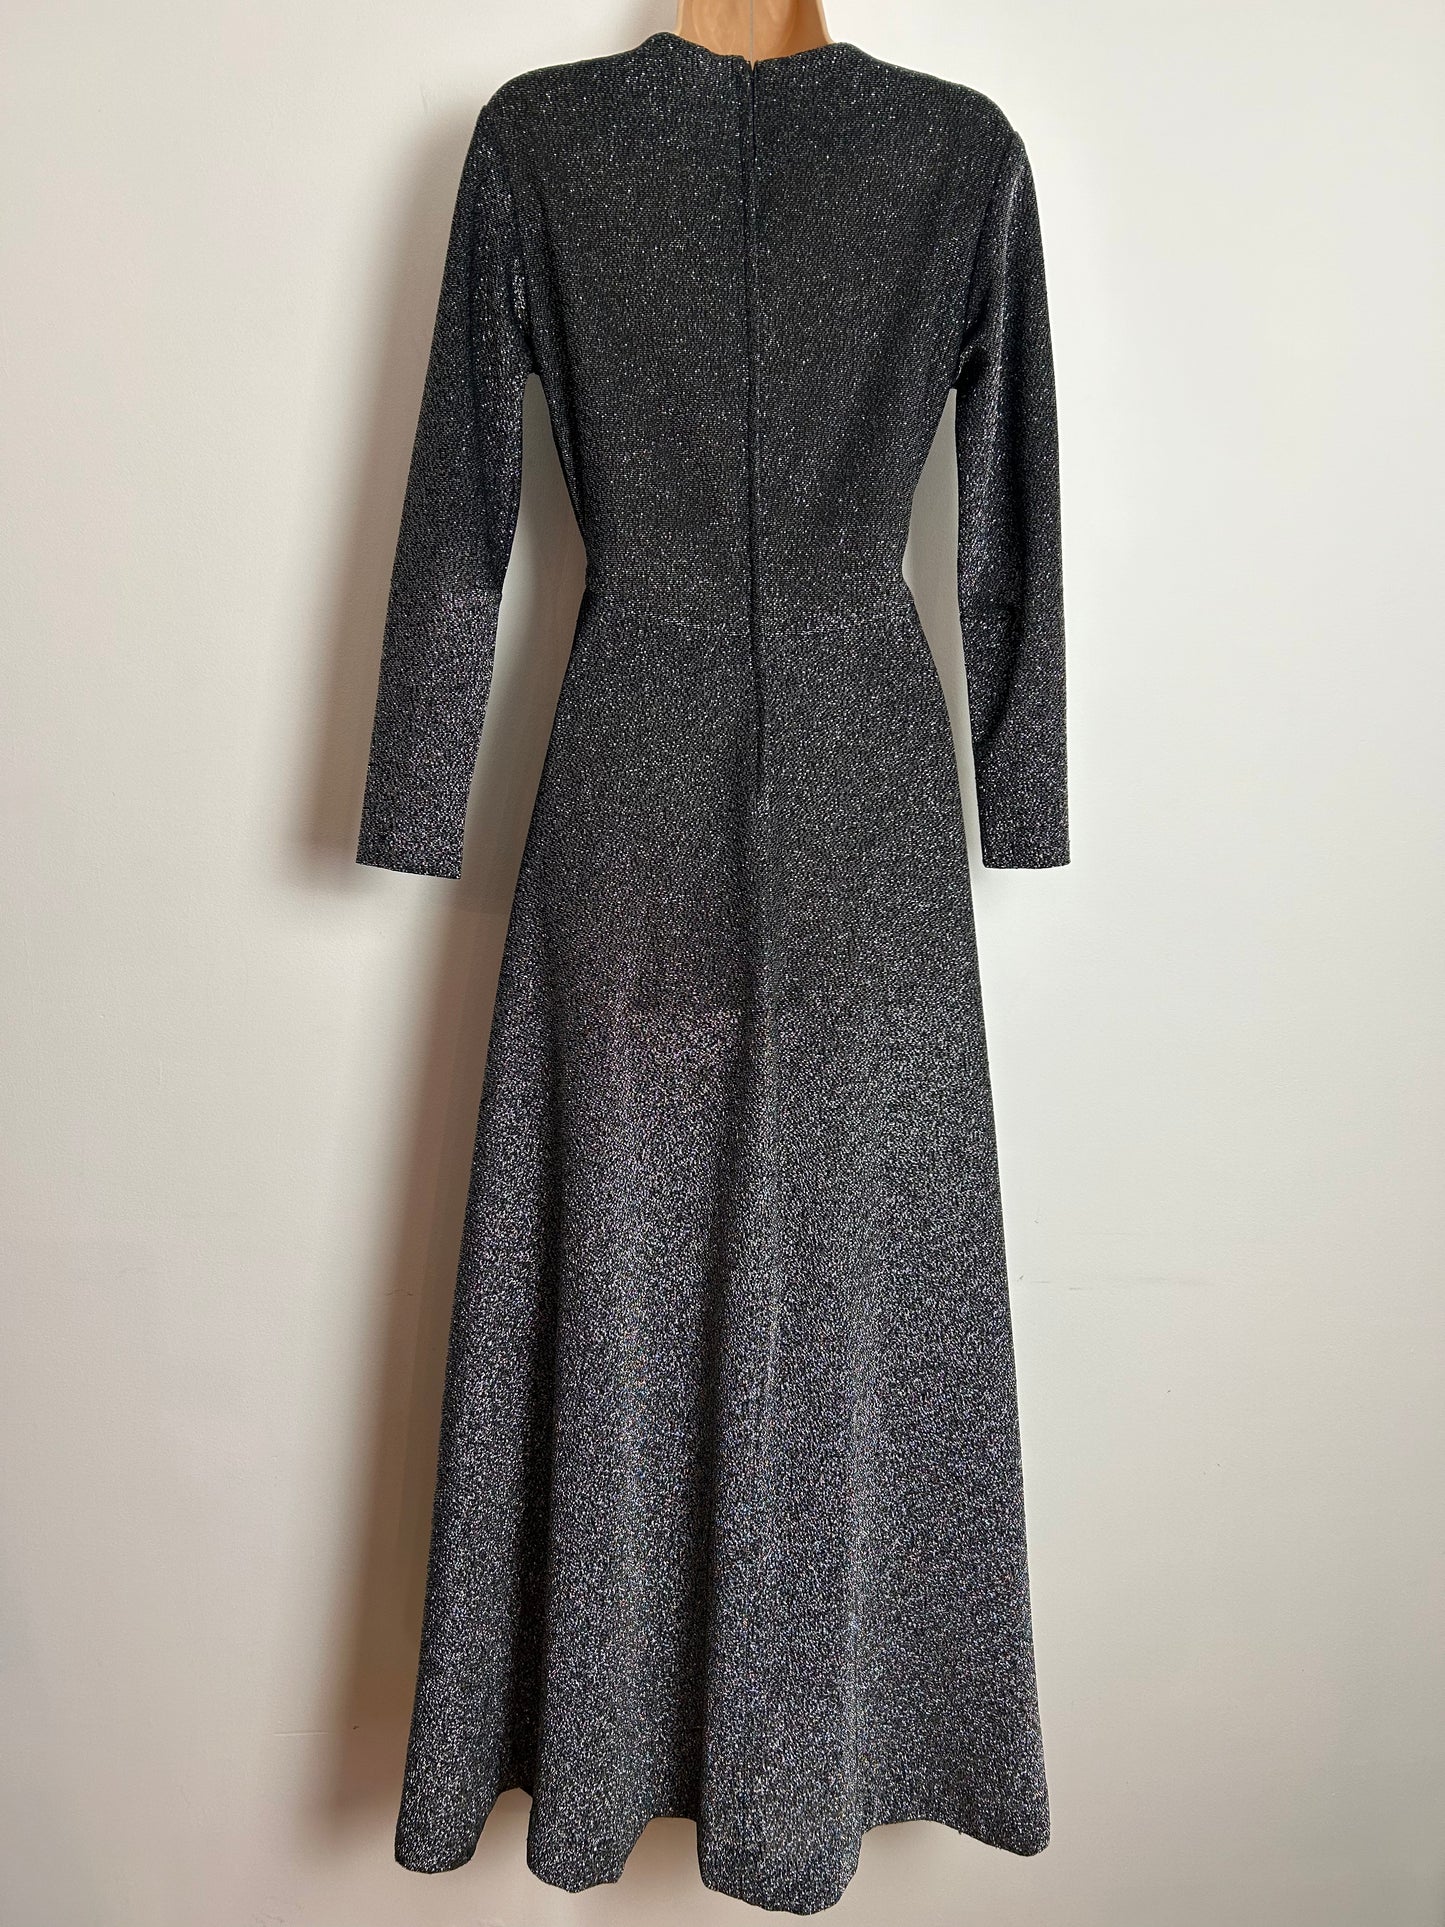 Vintage 1970s Size 10 Gorgeous Black & Silver Glittery Lurex Long Sleeve Occasion Evening Maxi Dress